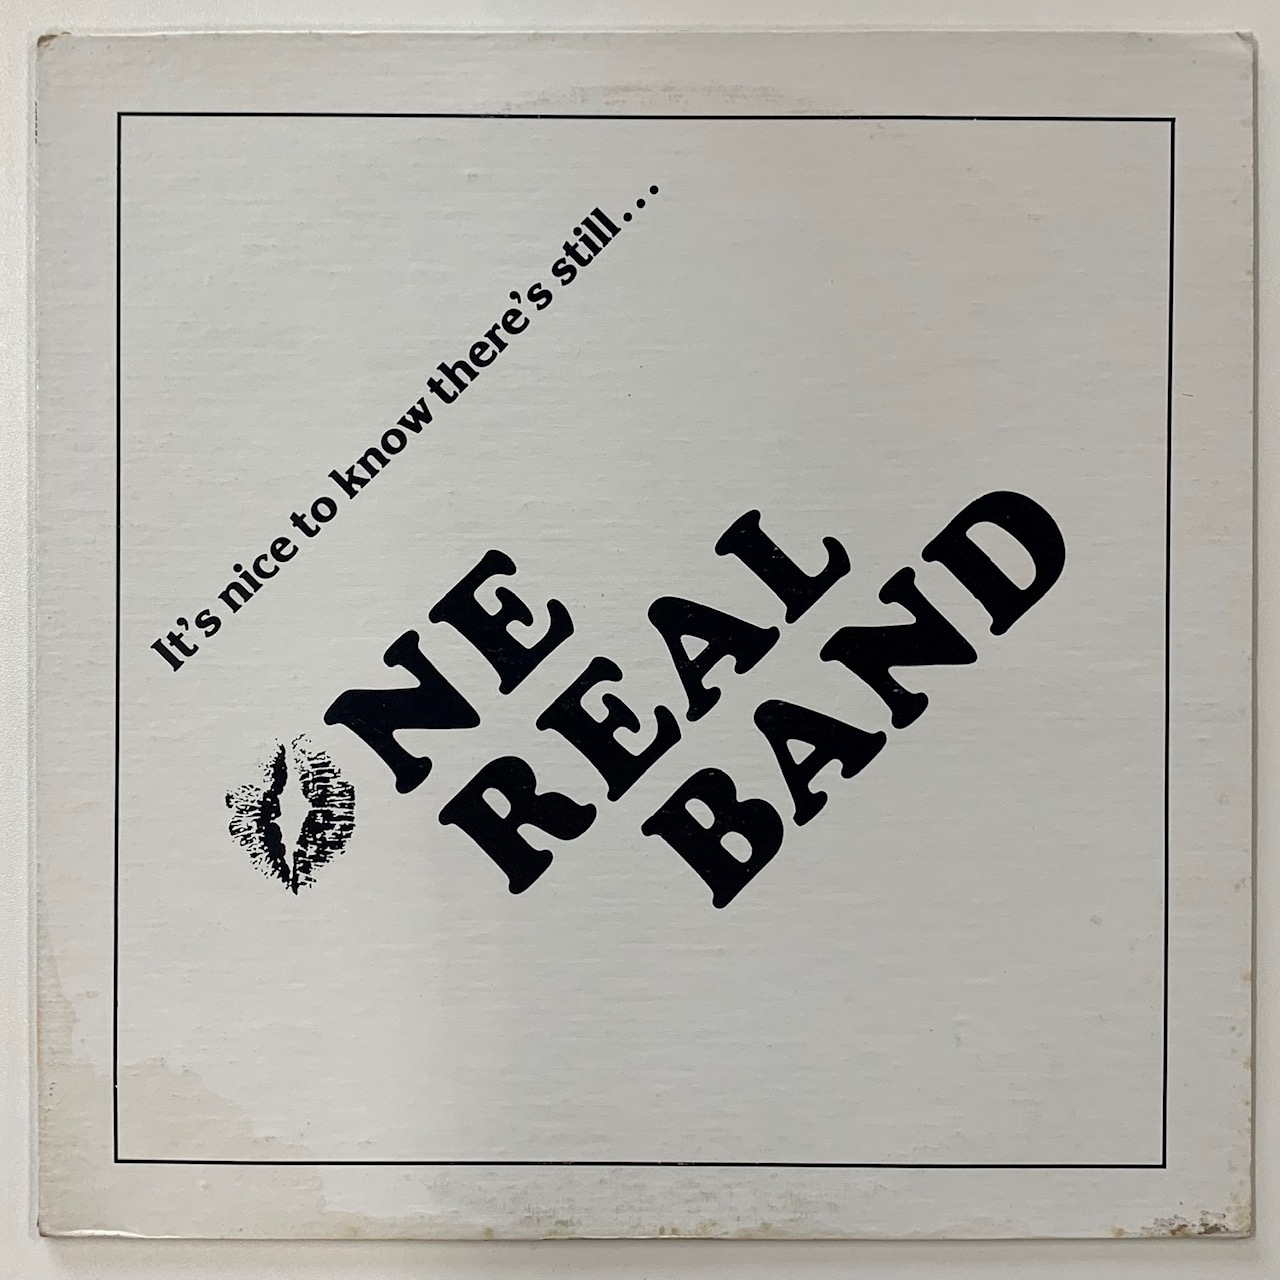 ONE REAL BAND - IT'S NICE TO KNOW THERE'S STILL...